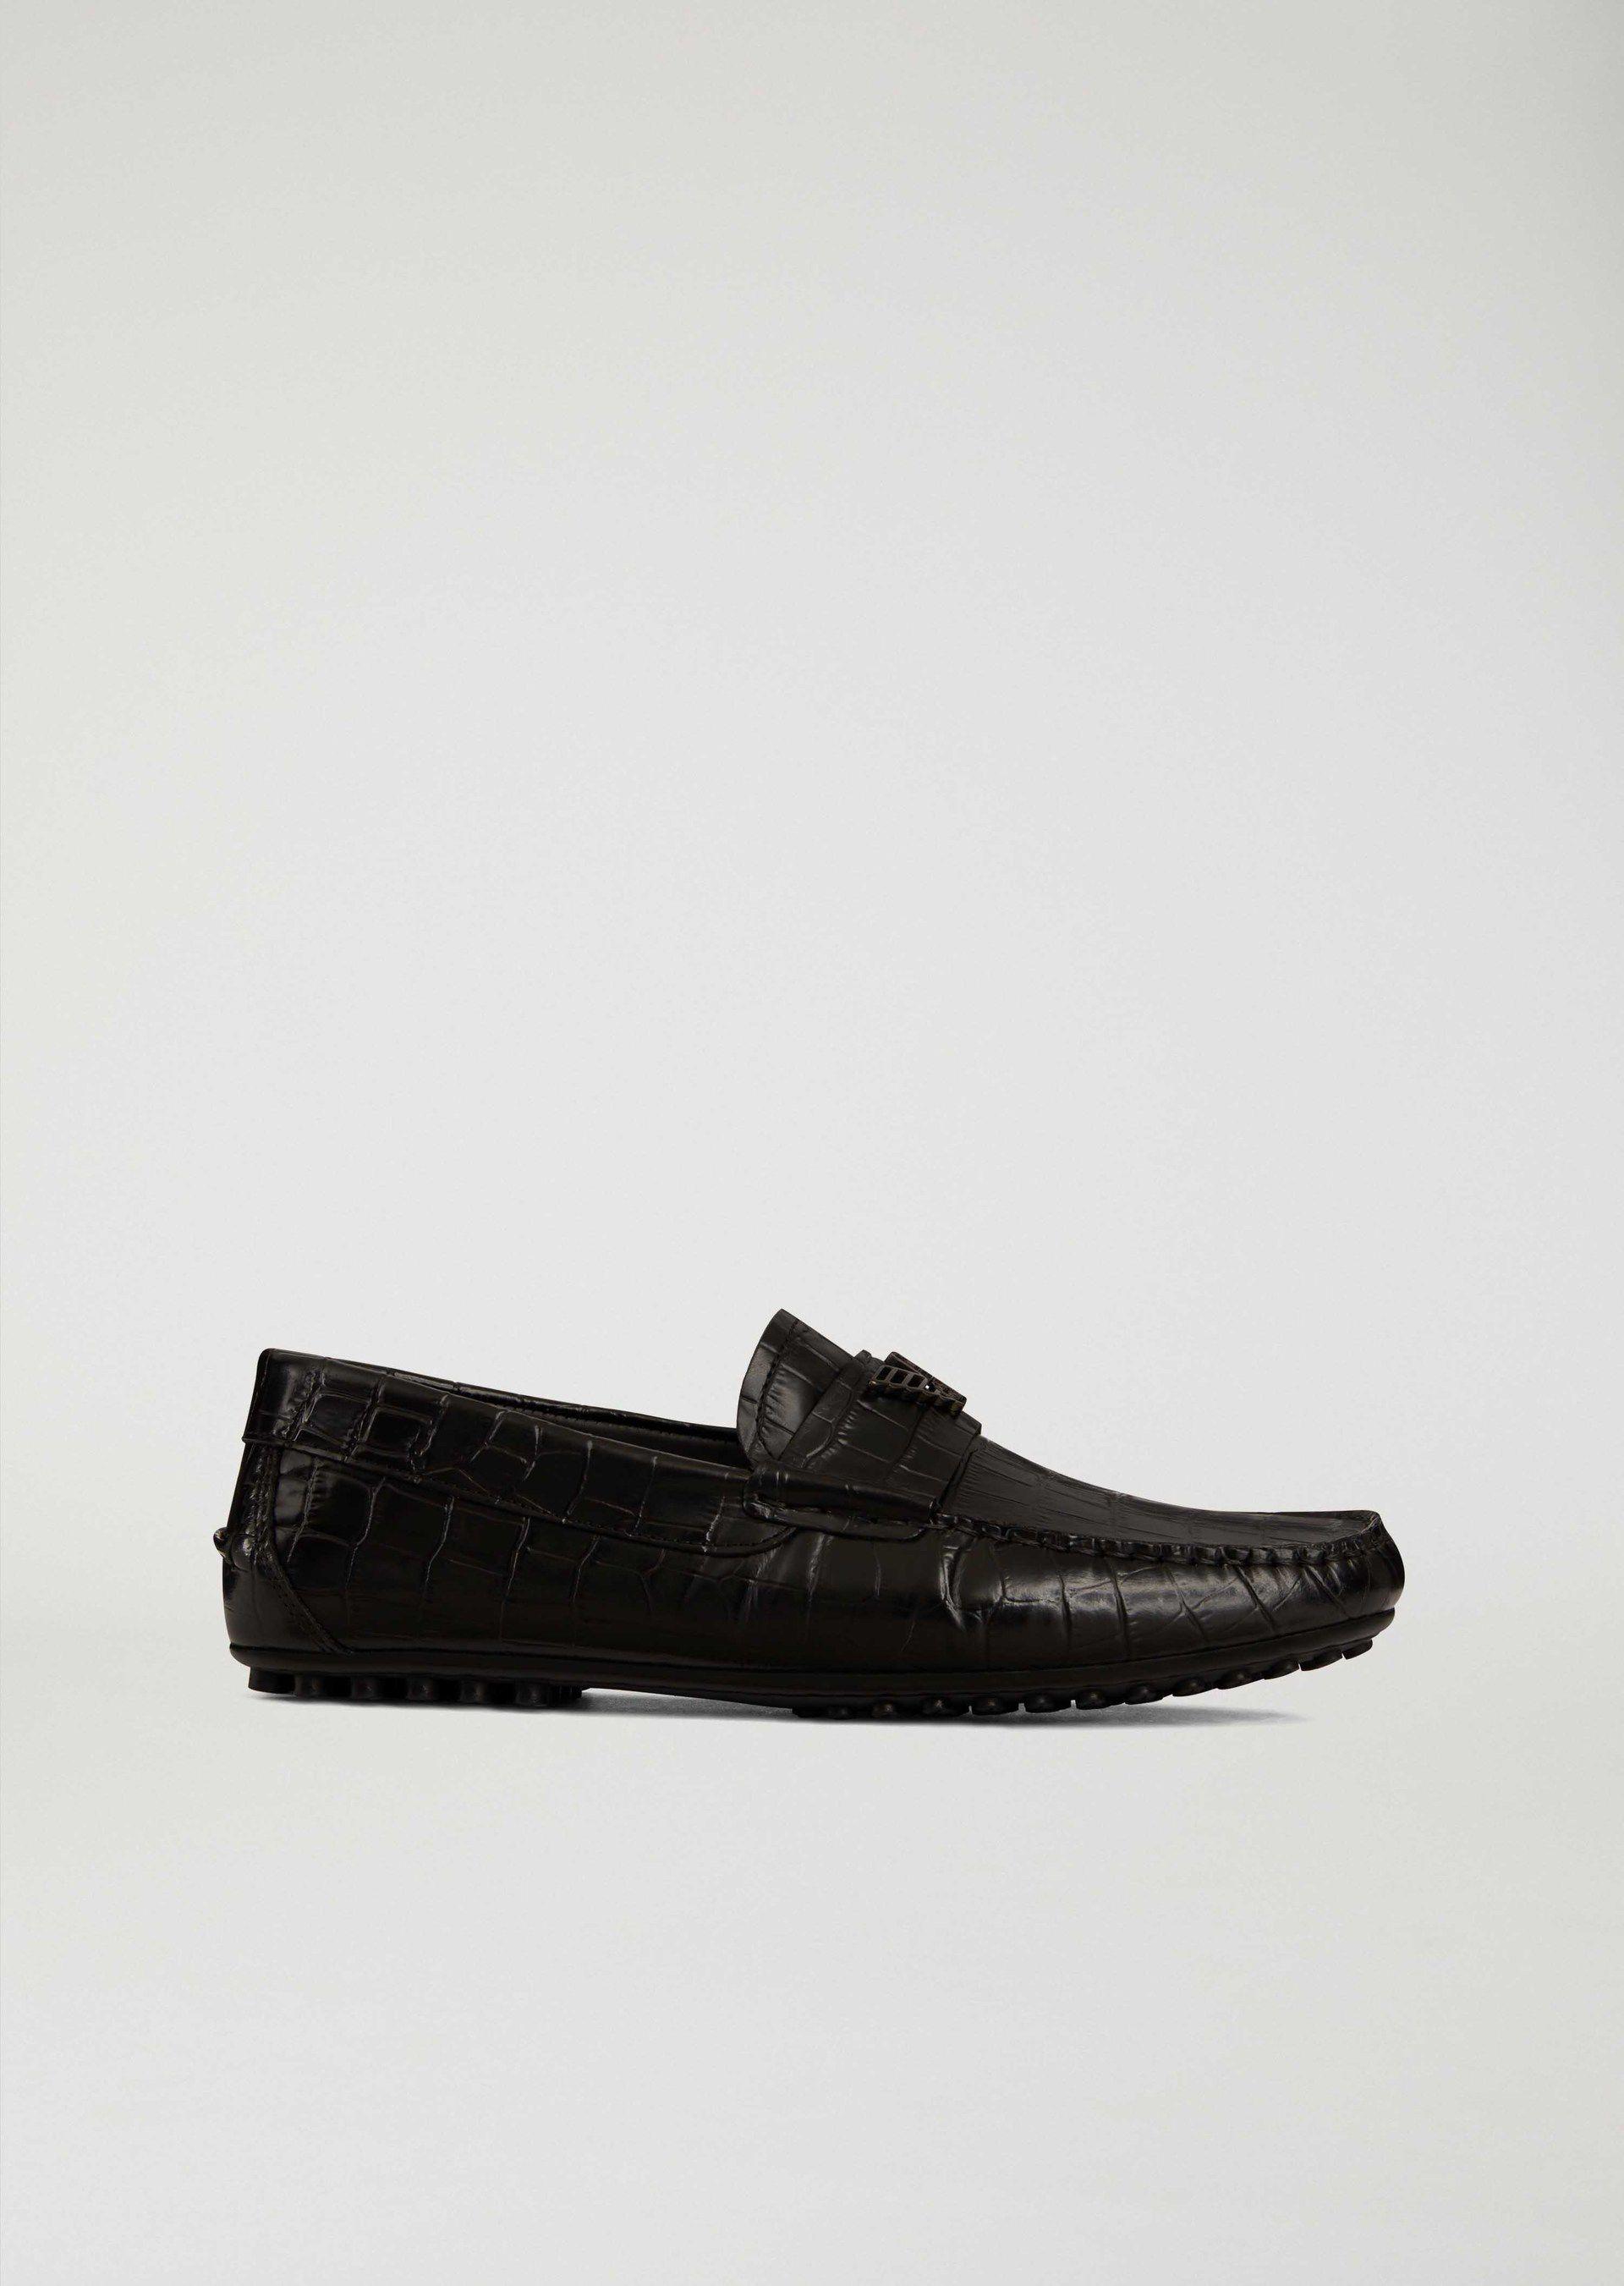 Emporio Armani Driving Shoes - Item 11402359 In Black | ModeSens